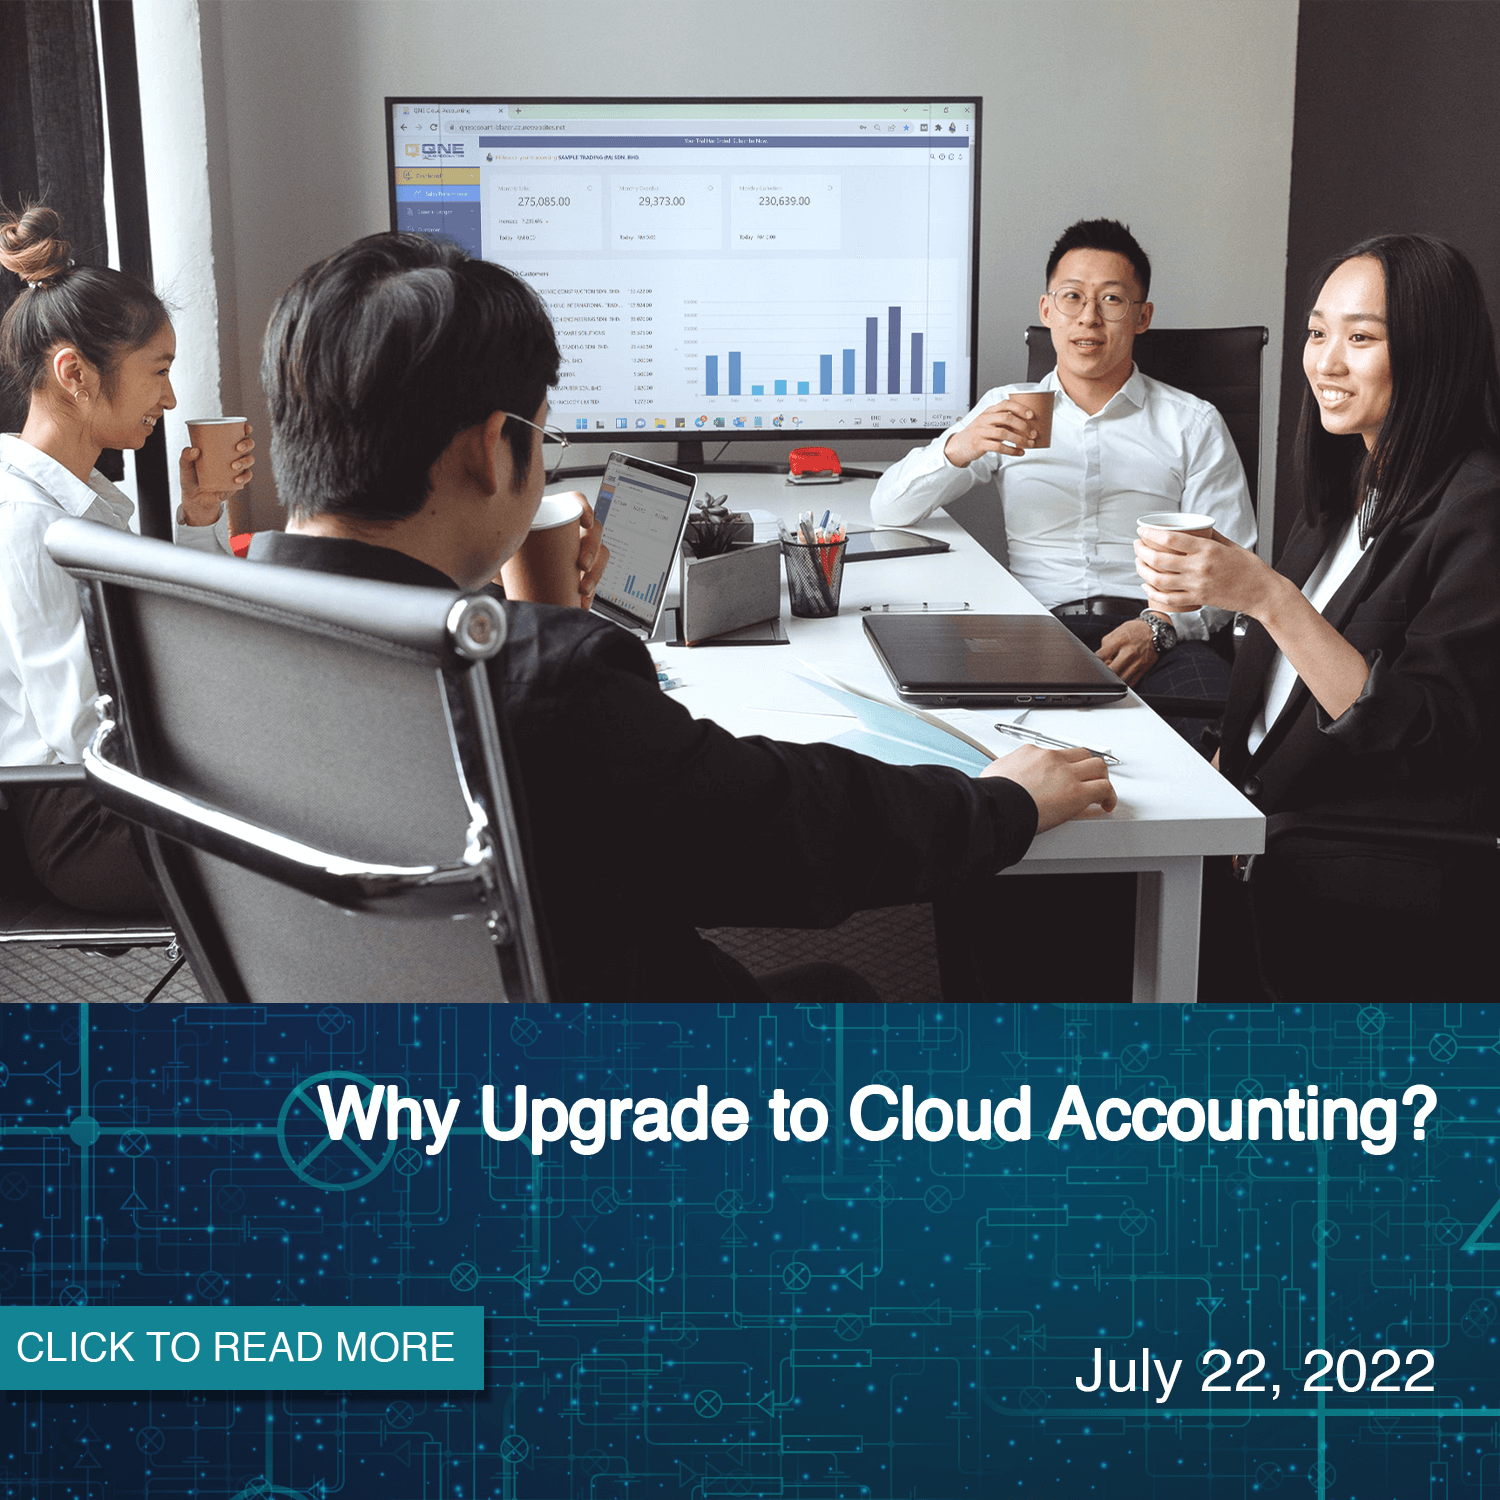 Why Use Cloud Accounting